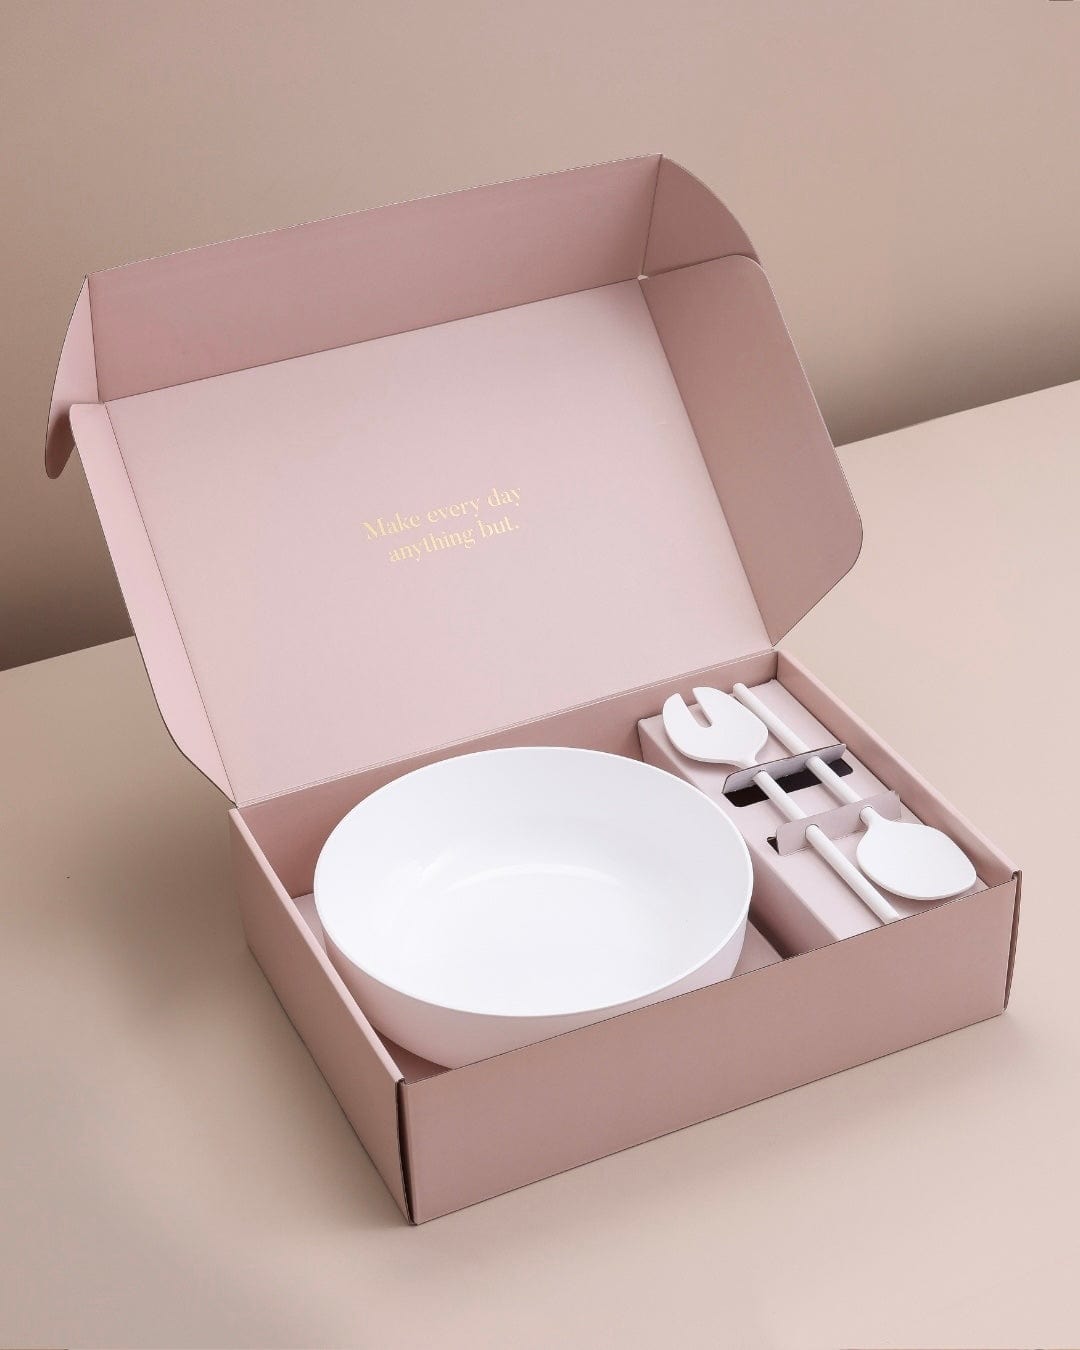 Styleware entertainers boxed salad and salad server set Brisbane